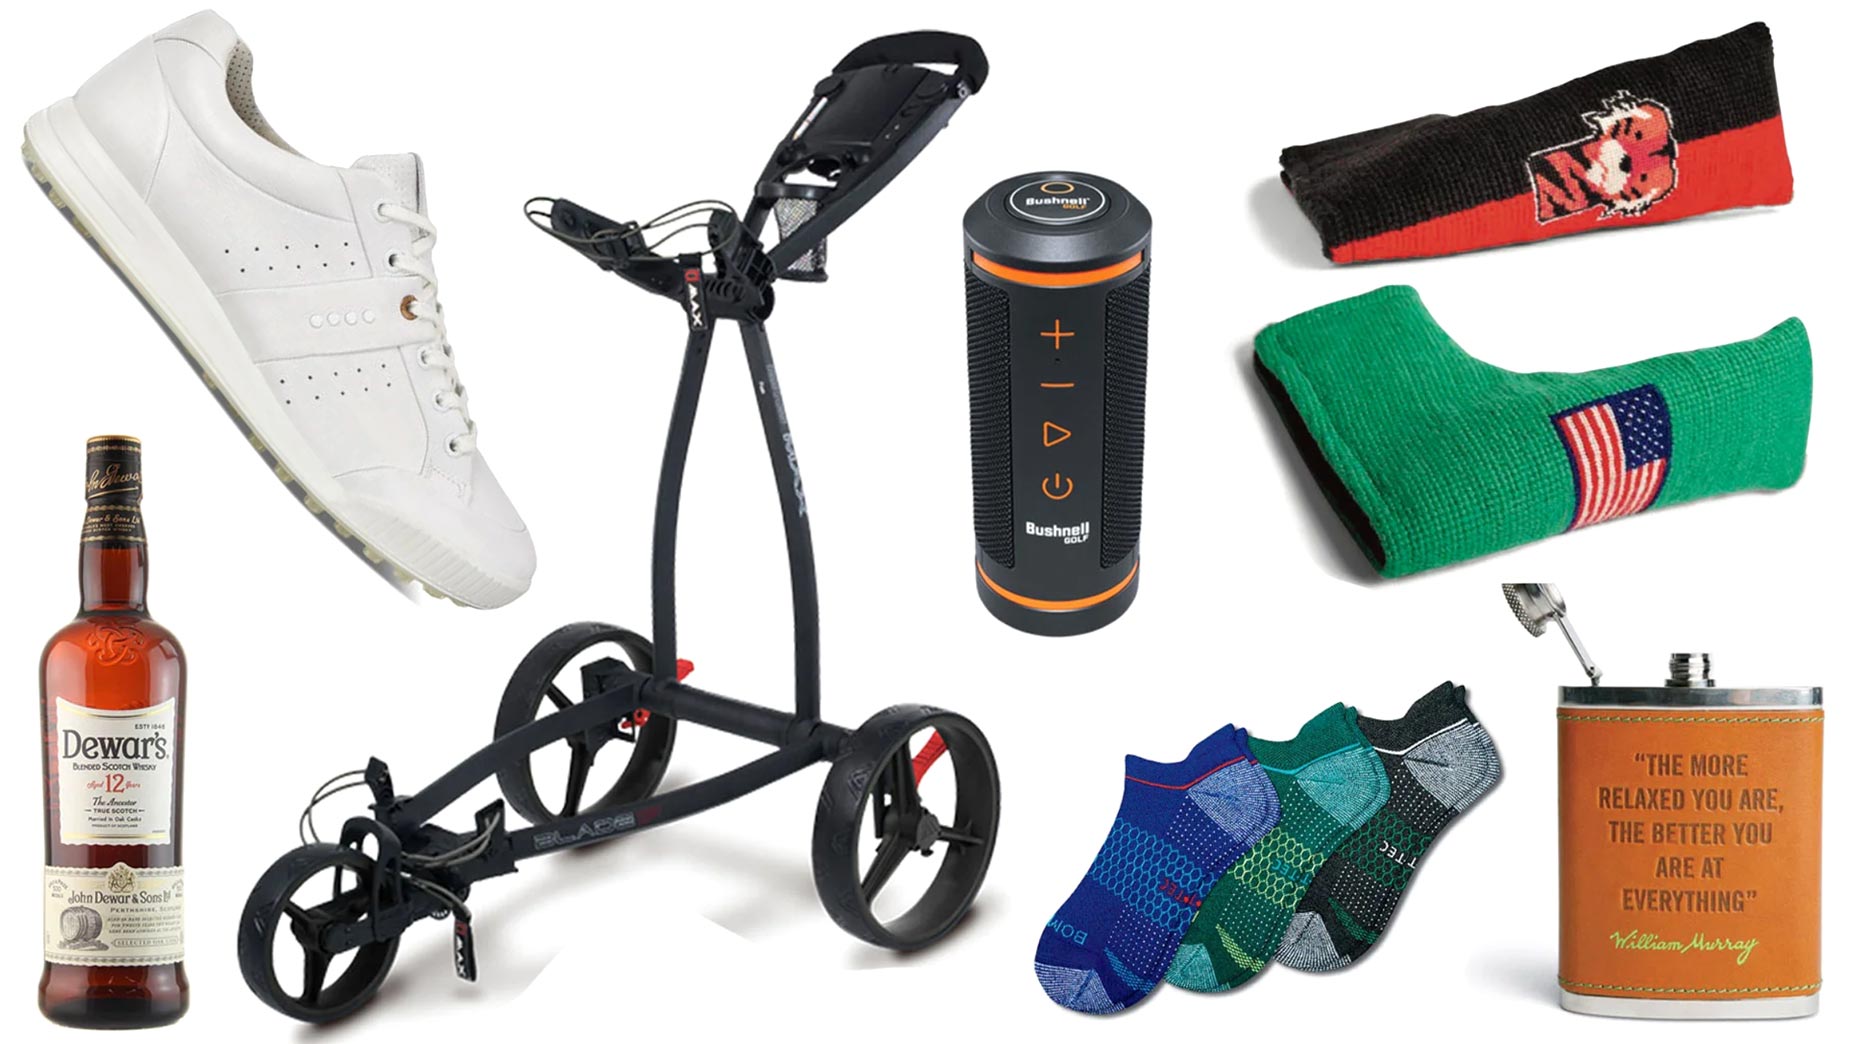 top gifts for fathers day